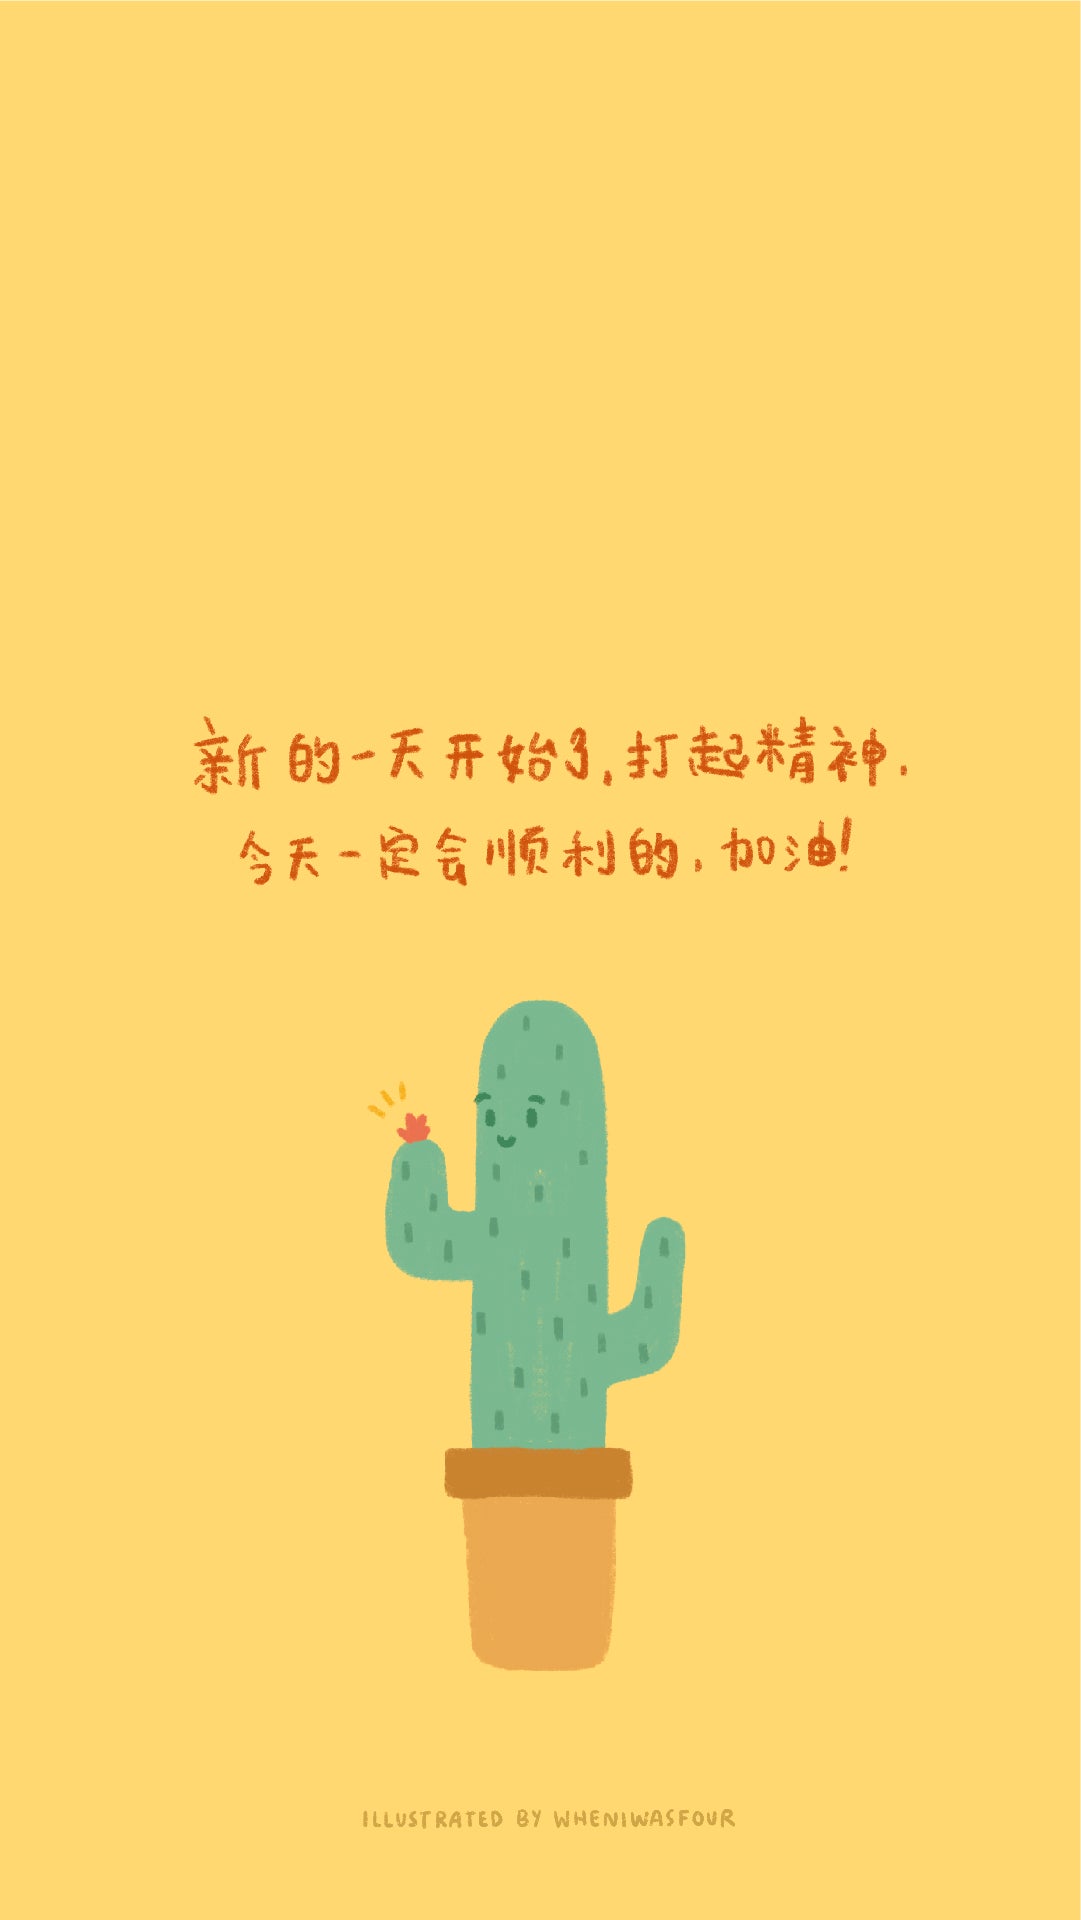 phone wallpaper of a digital illustration with chinese verse about a new day cheer up smooth sailing dont be sad